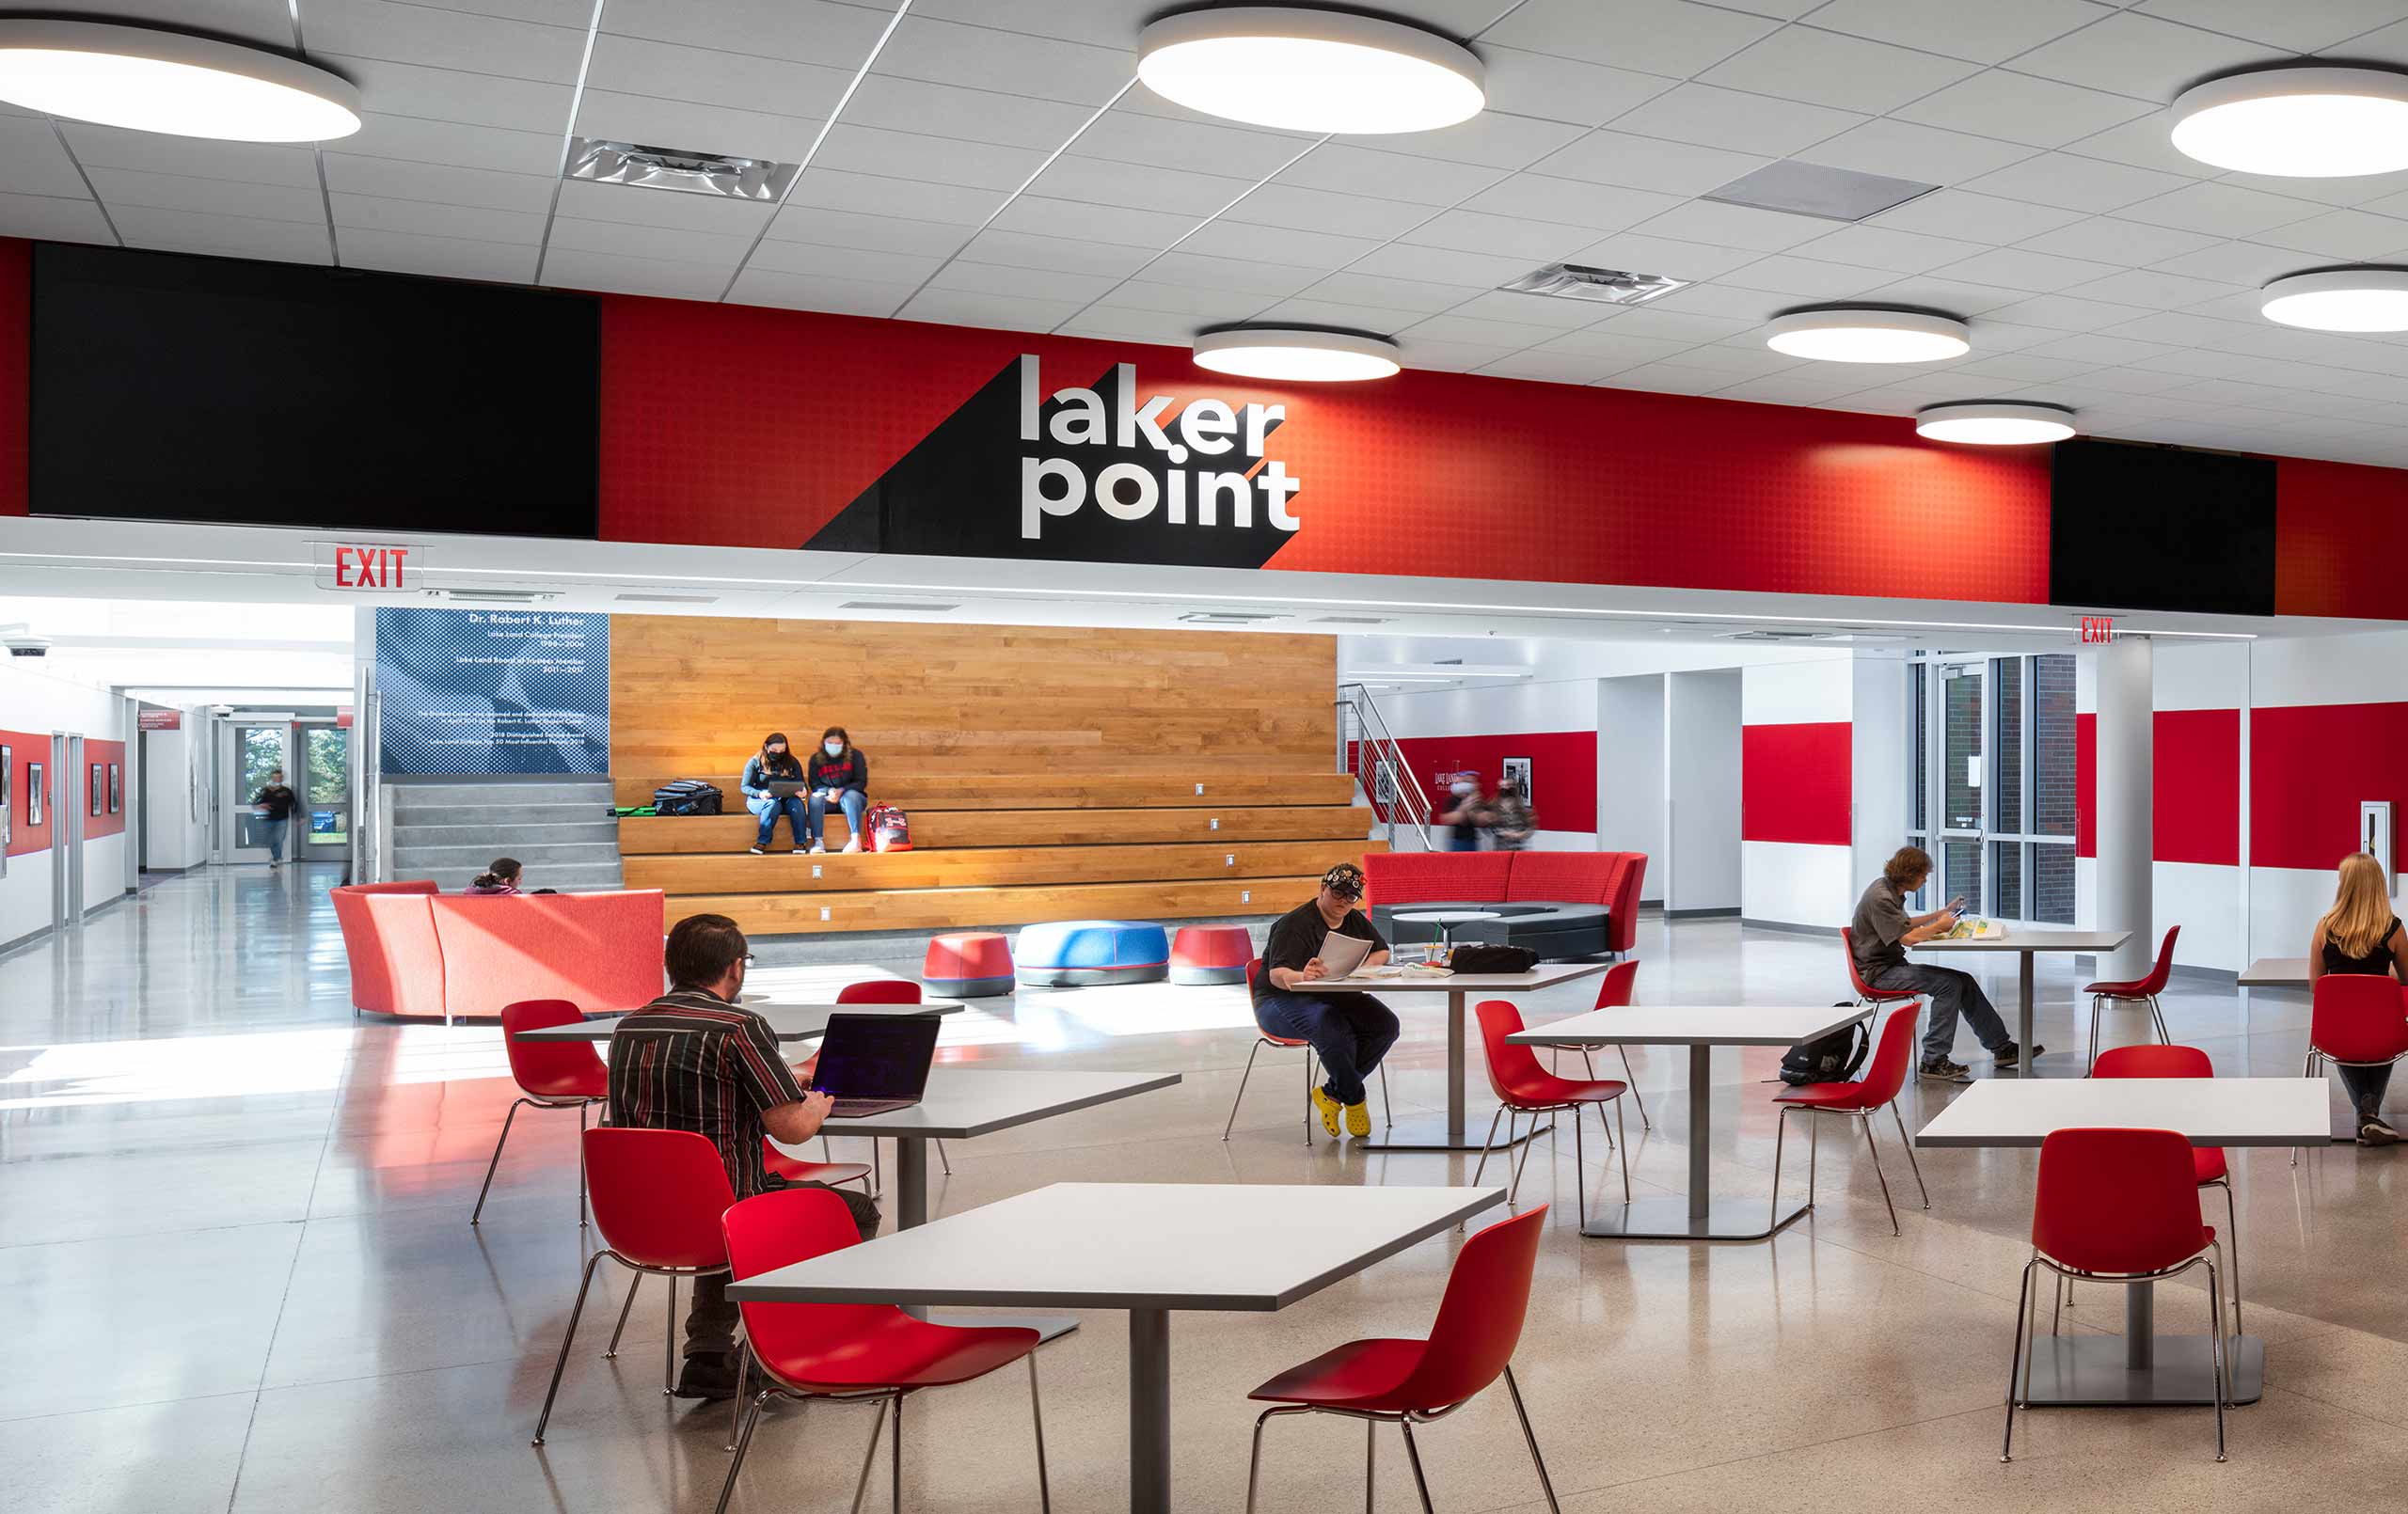 College cafeteria with red furnishings and wood feature wall in background